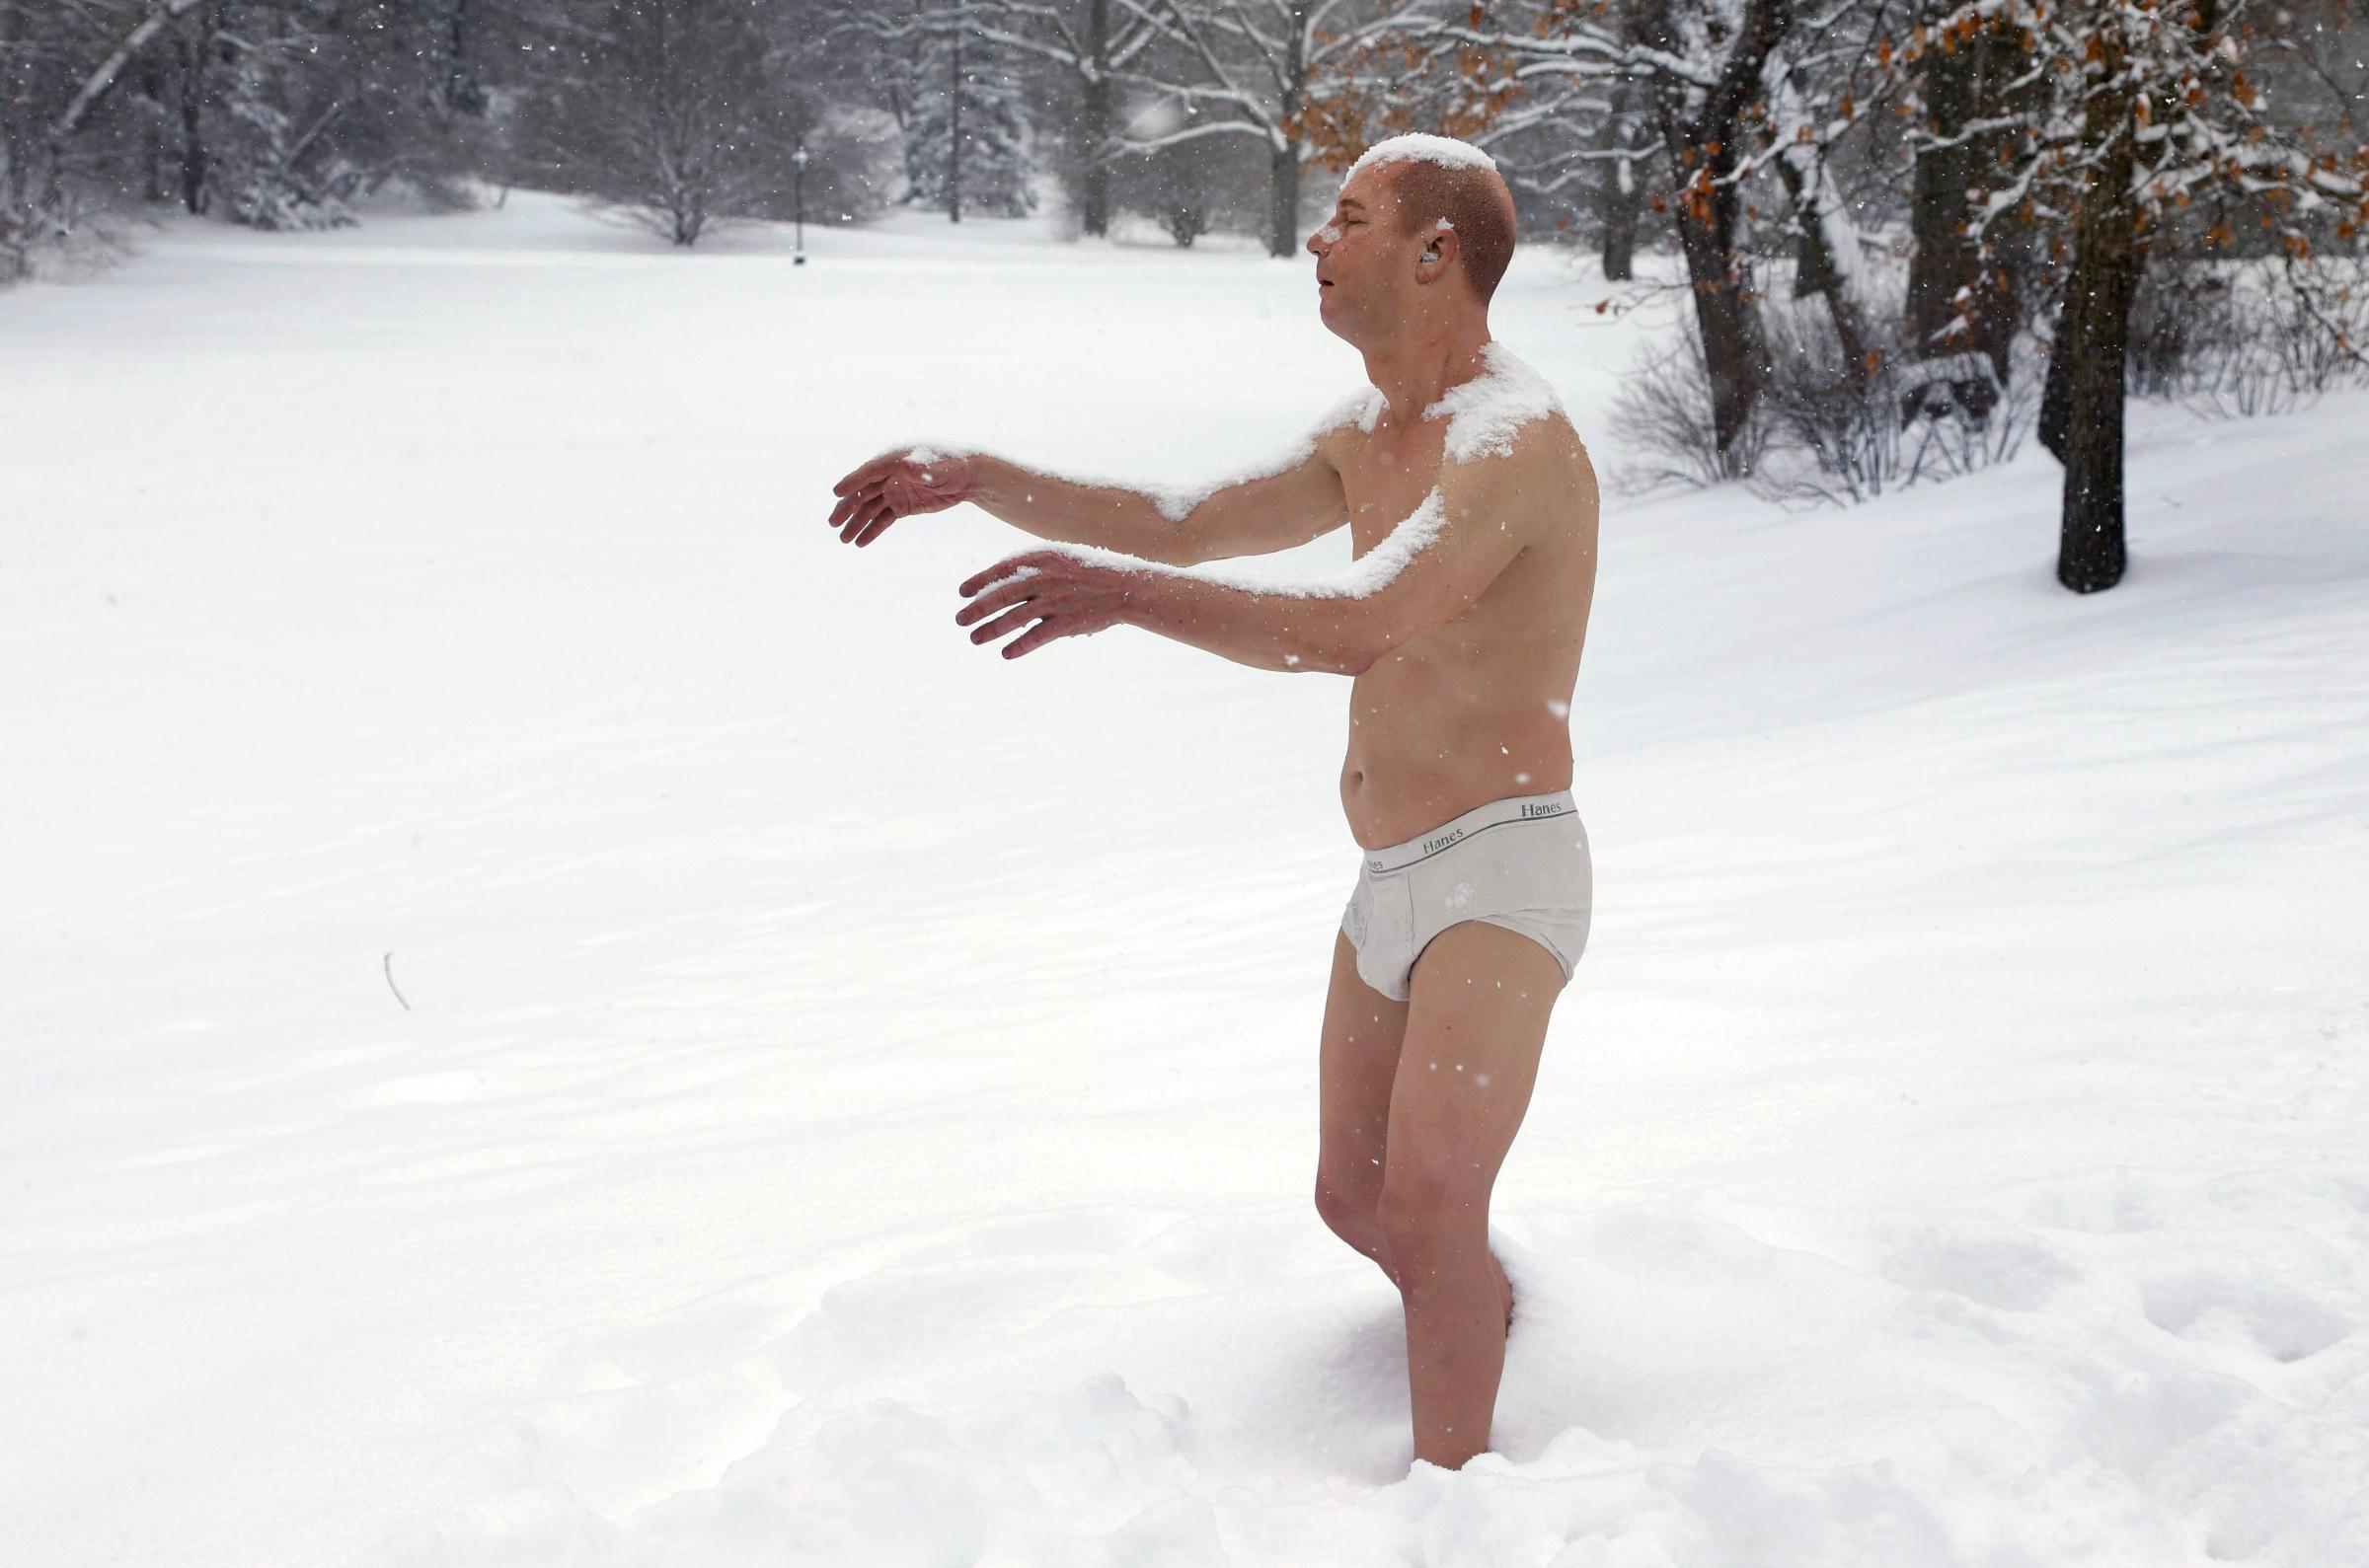 A statue of a man sleepwalking in his underpants is surrounded by snow on the campus of Wellesley College, in Wellesley, Mass., Feb. 5, 2014. The sculpture entitled "Sleepwalker" is part of an exhibit by sculptor Tony Matelli at the college's Davis Museum.